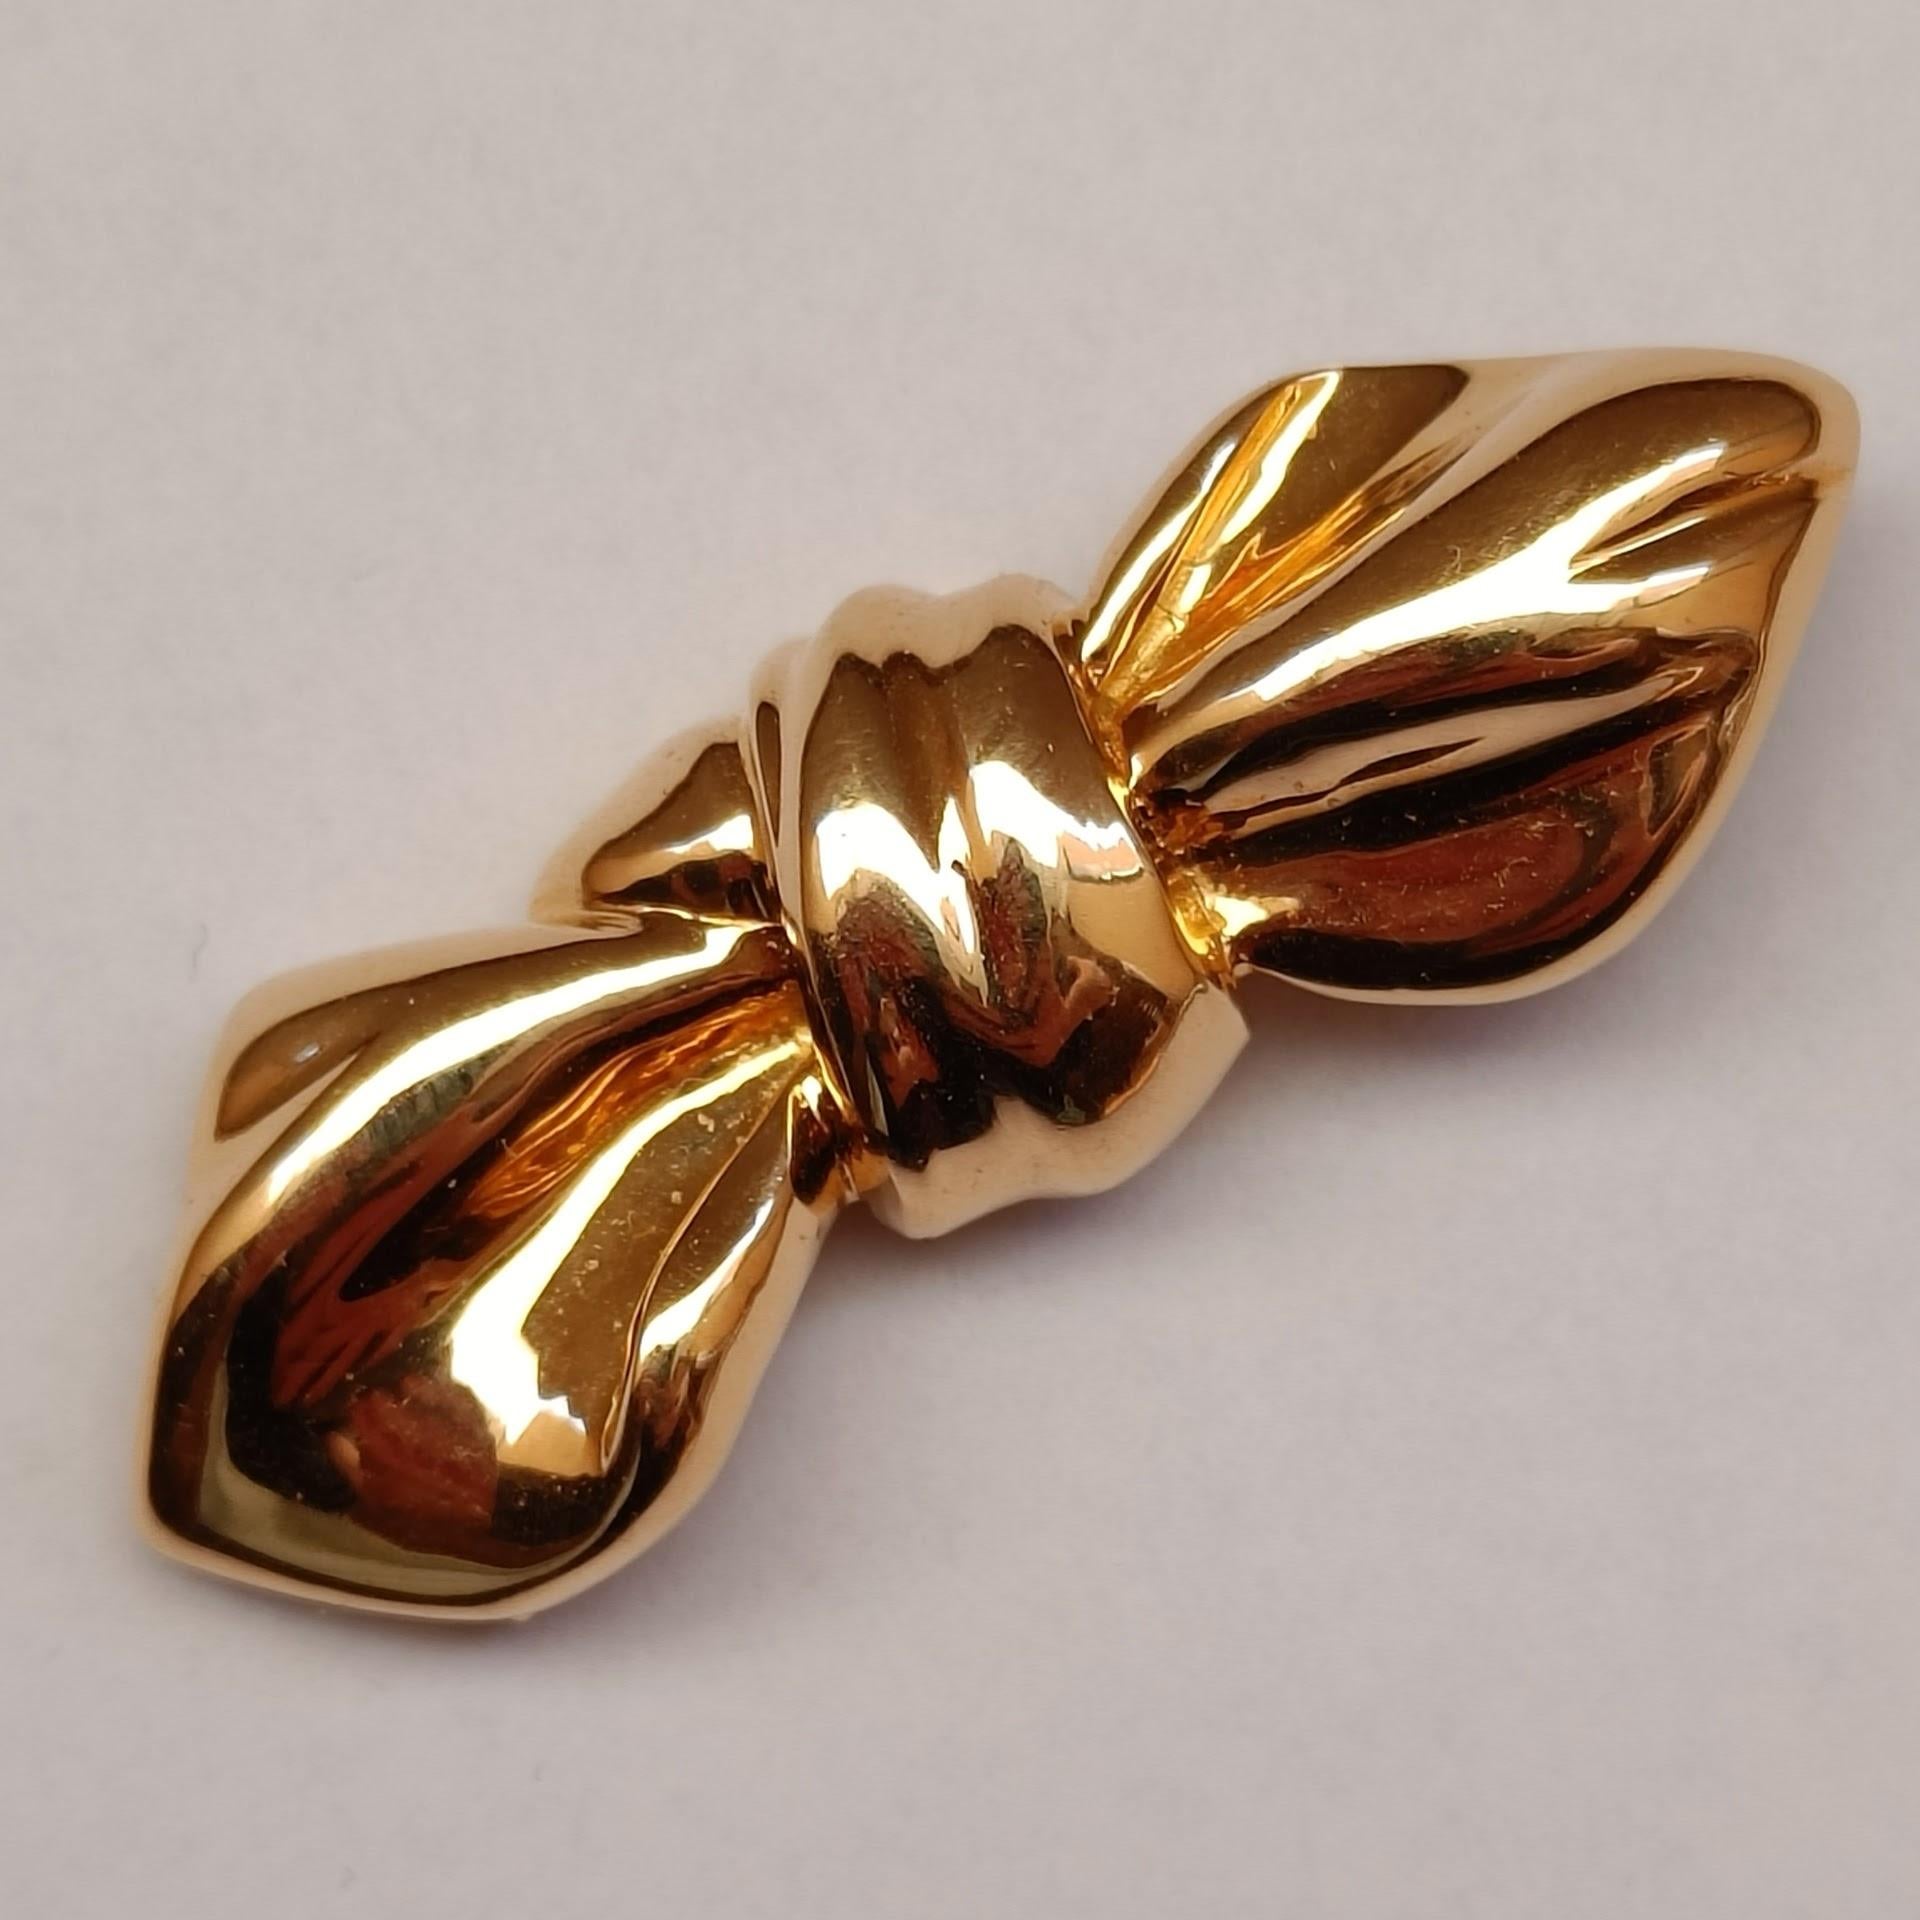 Van Cleef & Arpels, a bold and chunky clip brooch designed as a bow crafted in 18k yellow gold.

Stamped VCA 750 and serial number.
Good condition, no defects.

Dimensions: 5 x 1.5 cm (approx.)
Weight 14.65 grams

Original pouch included, signed Van